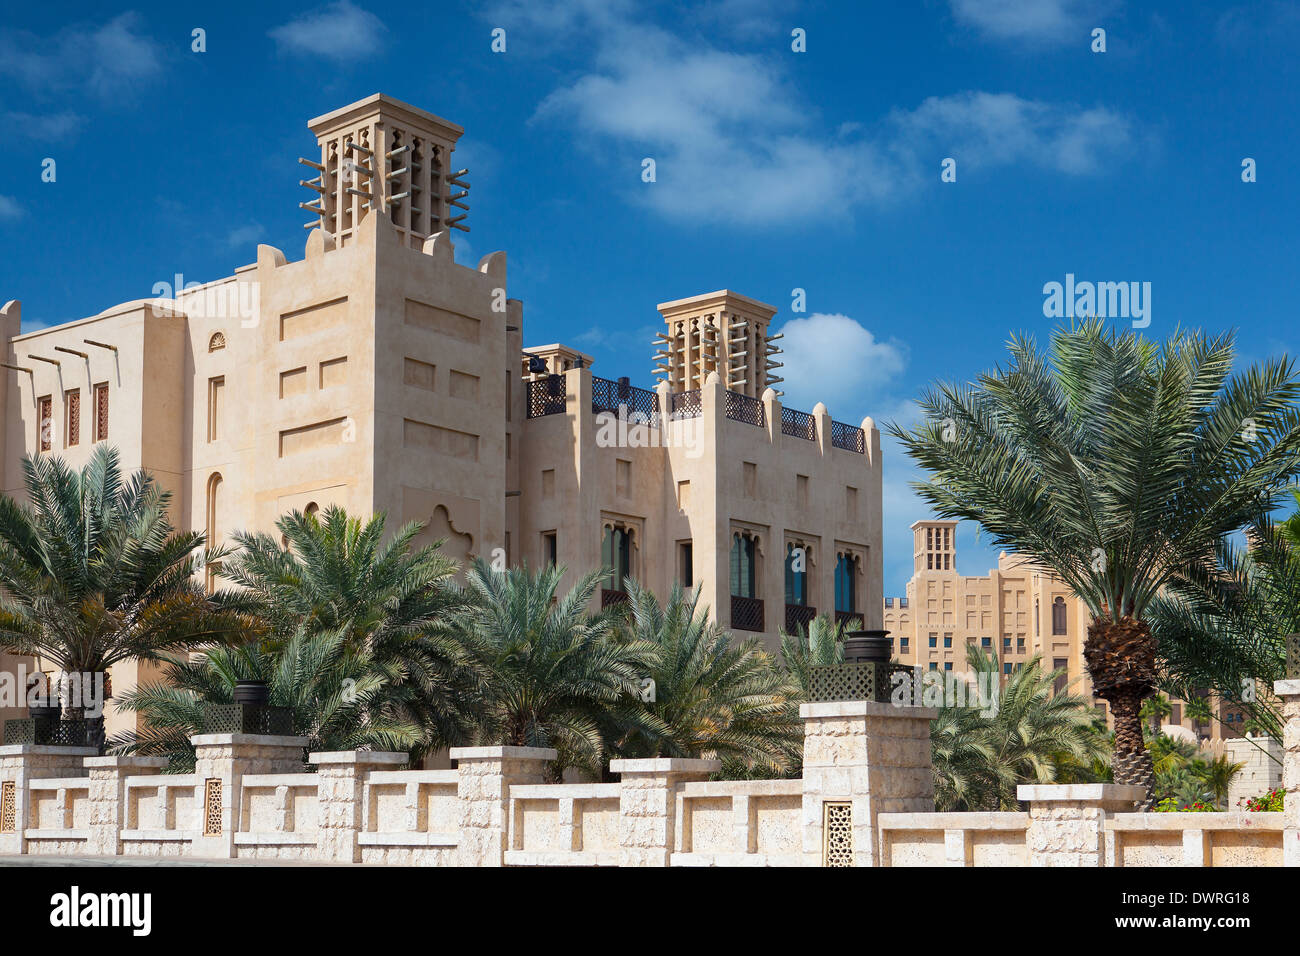 View of the Souk Madinat Jumeirah.Madinat Jumeirah contain two hotels and clusters of 29 typical Arabic houses. Stock Photo